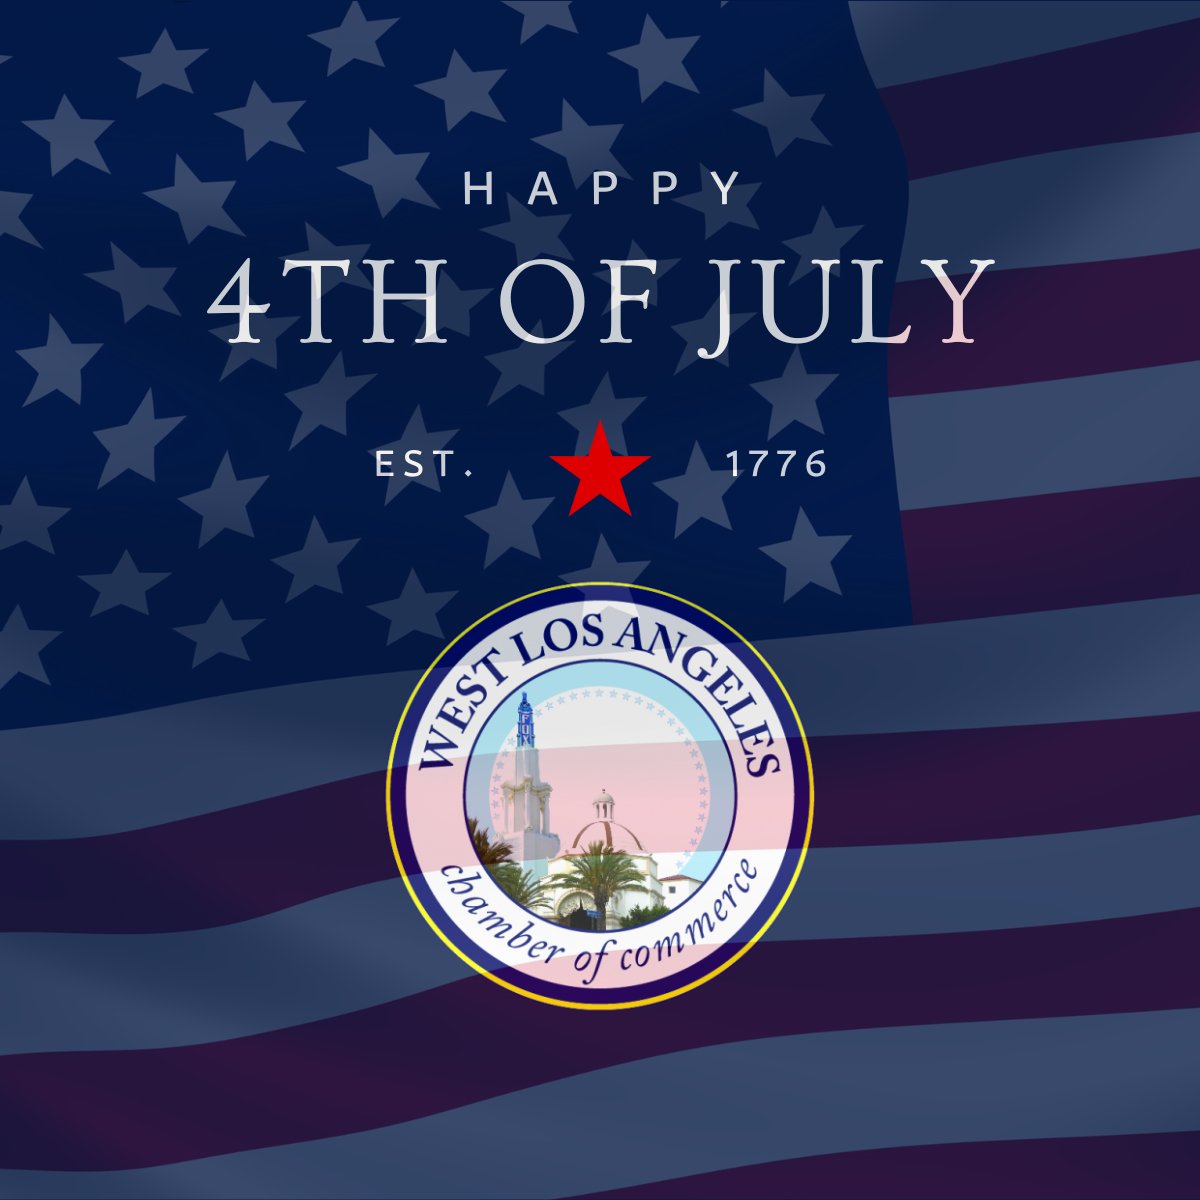 🎆 Happy 4th of July West LA! Join us in celebrating the spirit of freedom as we pay tribute to our nation's history and the values that bind us together. ❤️💙 #westla #westlachamber #IndependenceDay